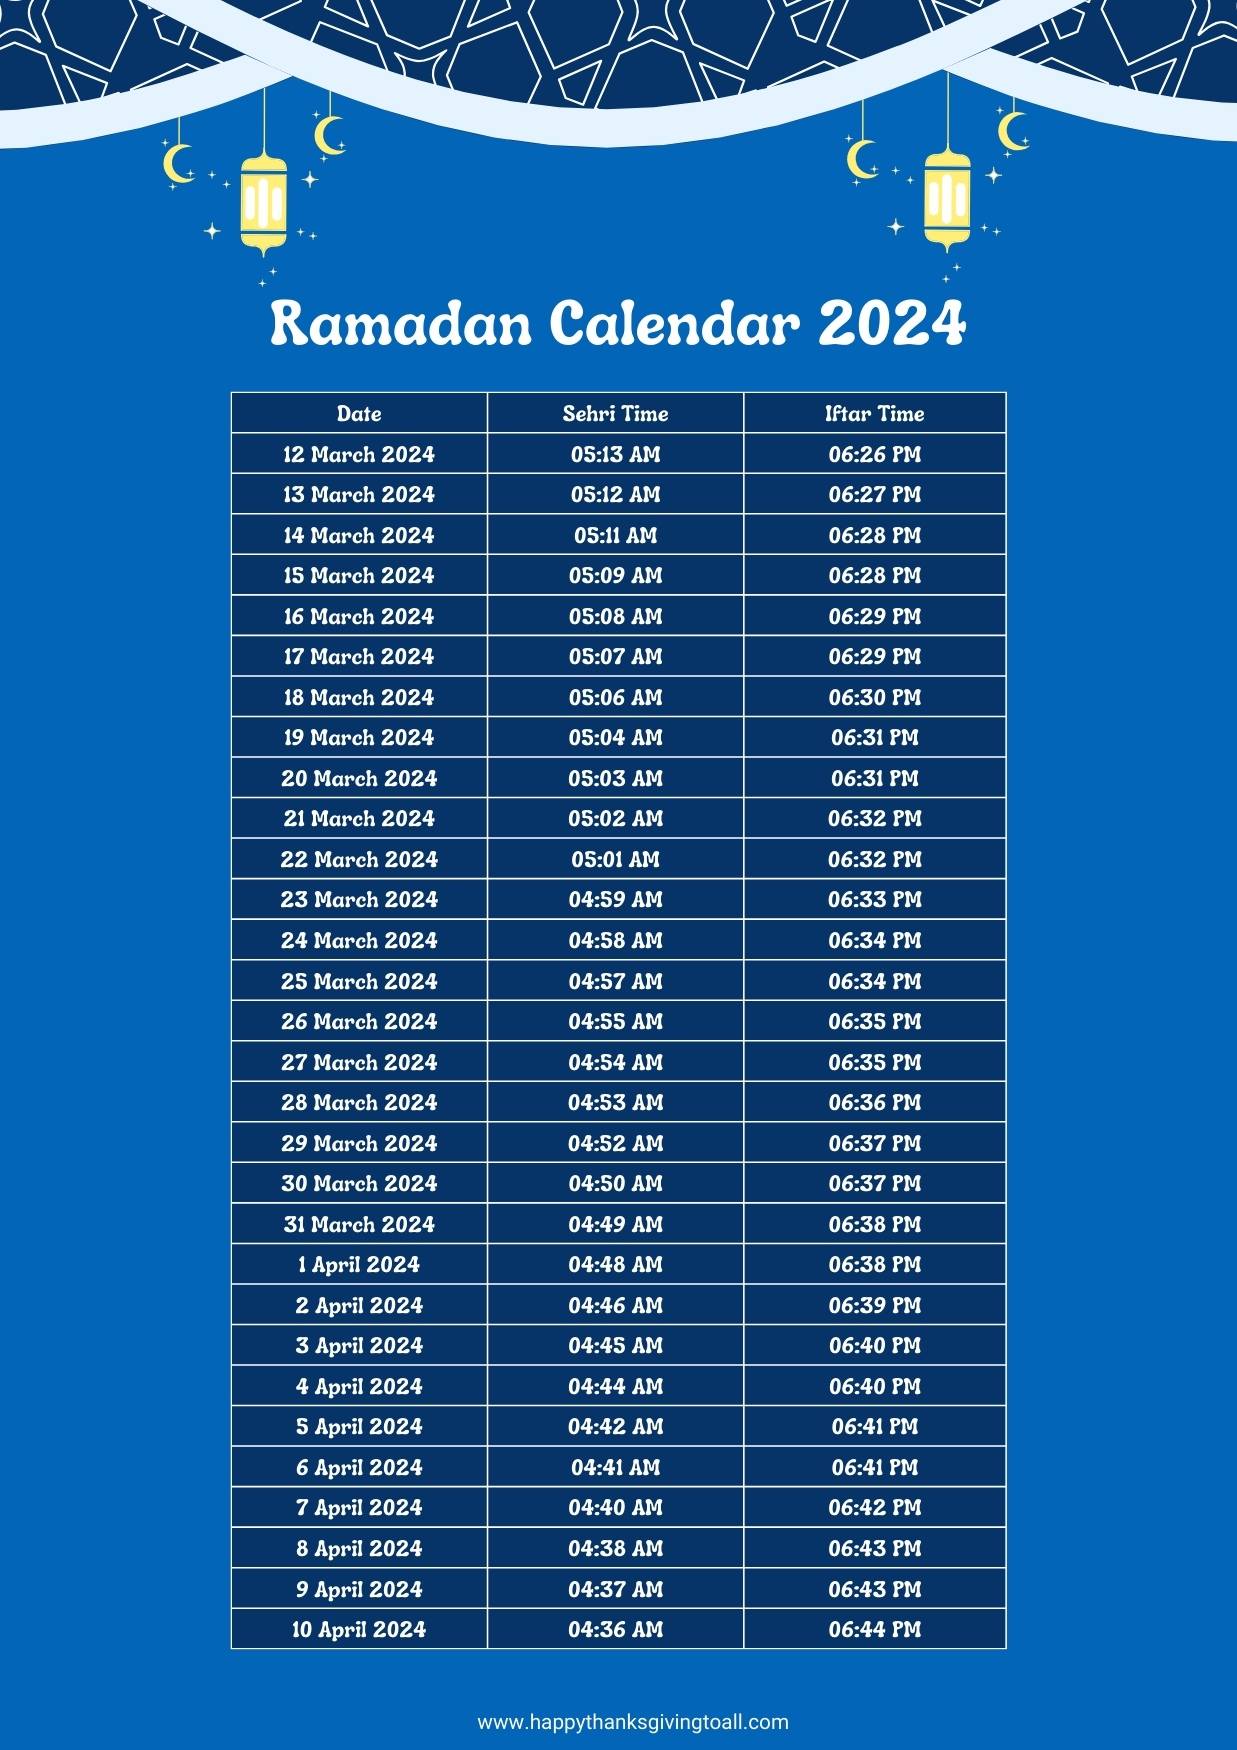 Ramadan Calendar 2024 with Sehri and Iftar Time, See the Time Table and